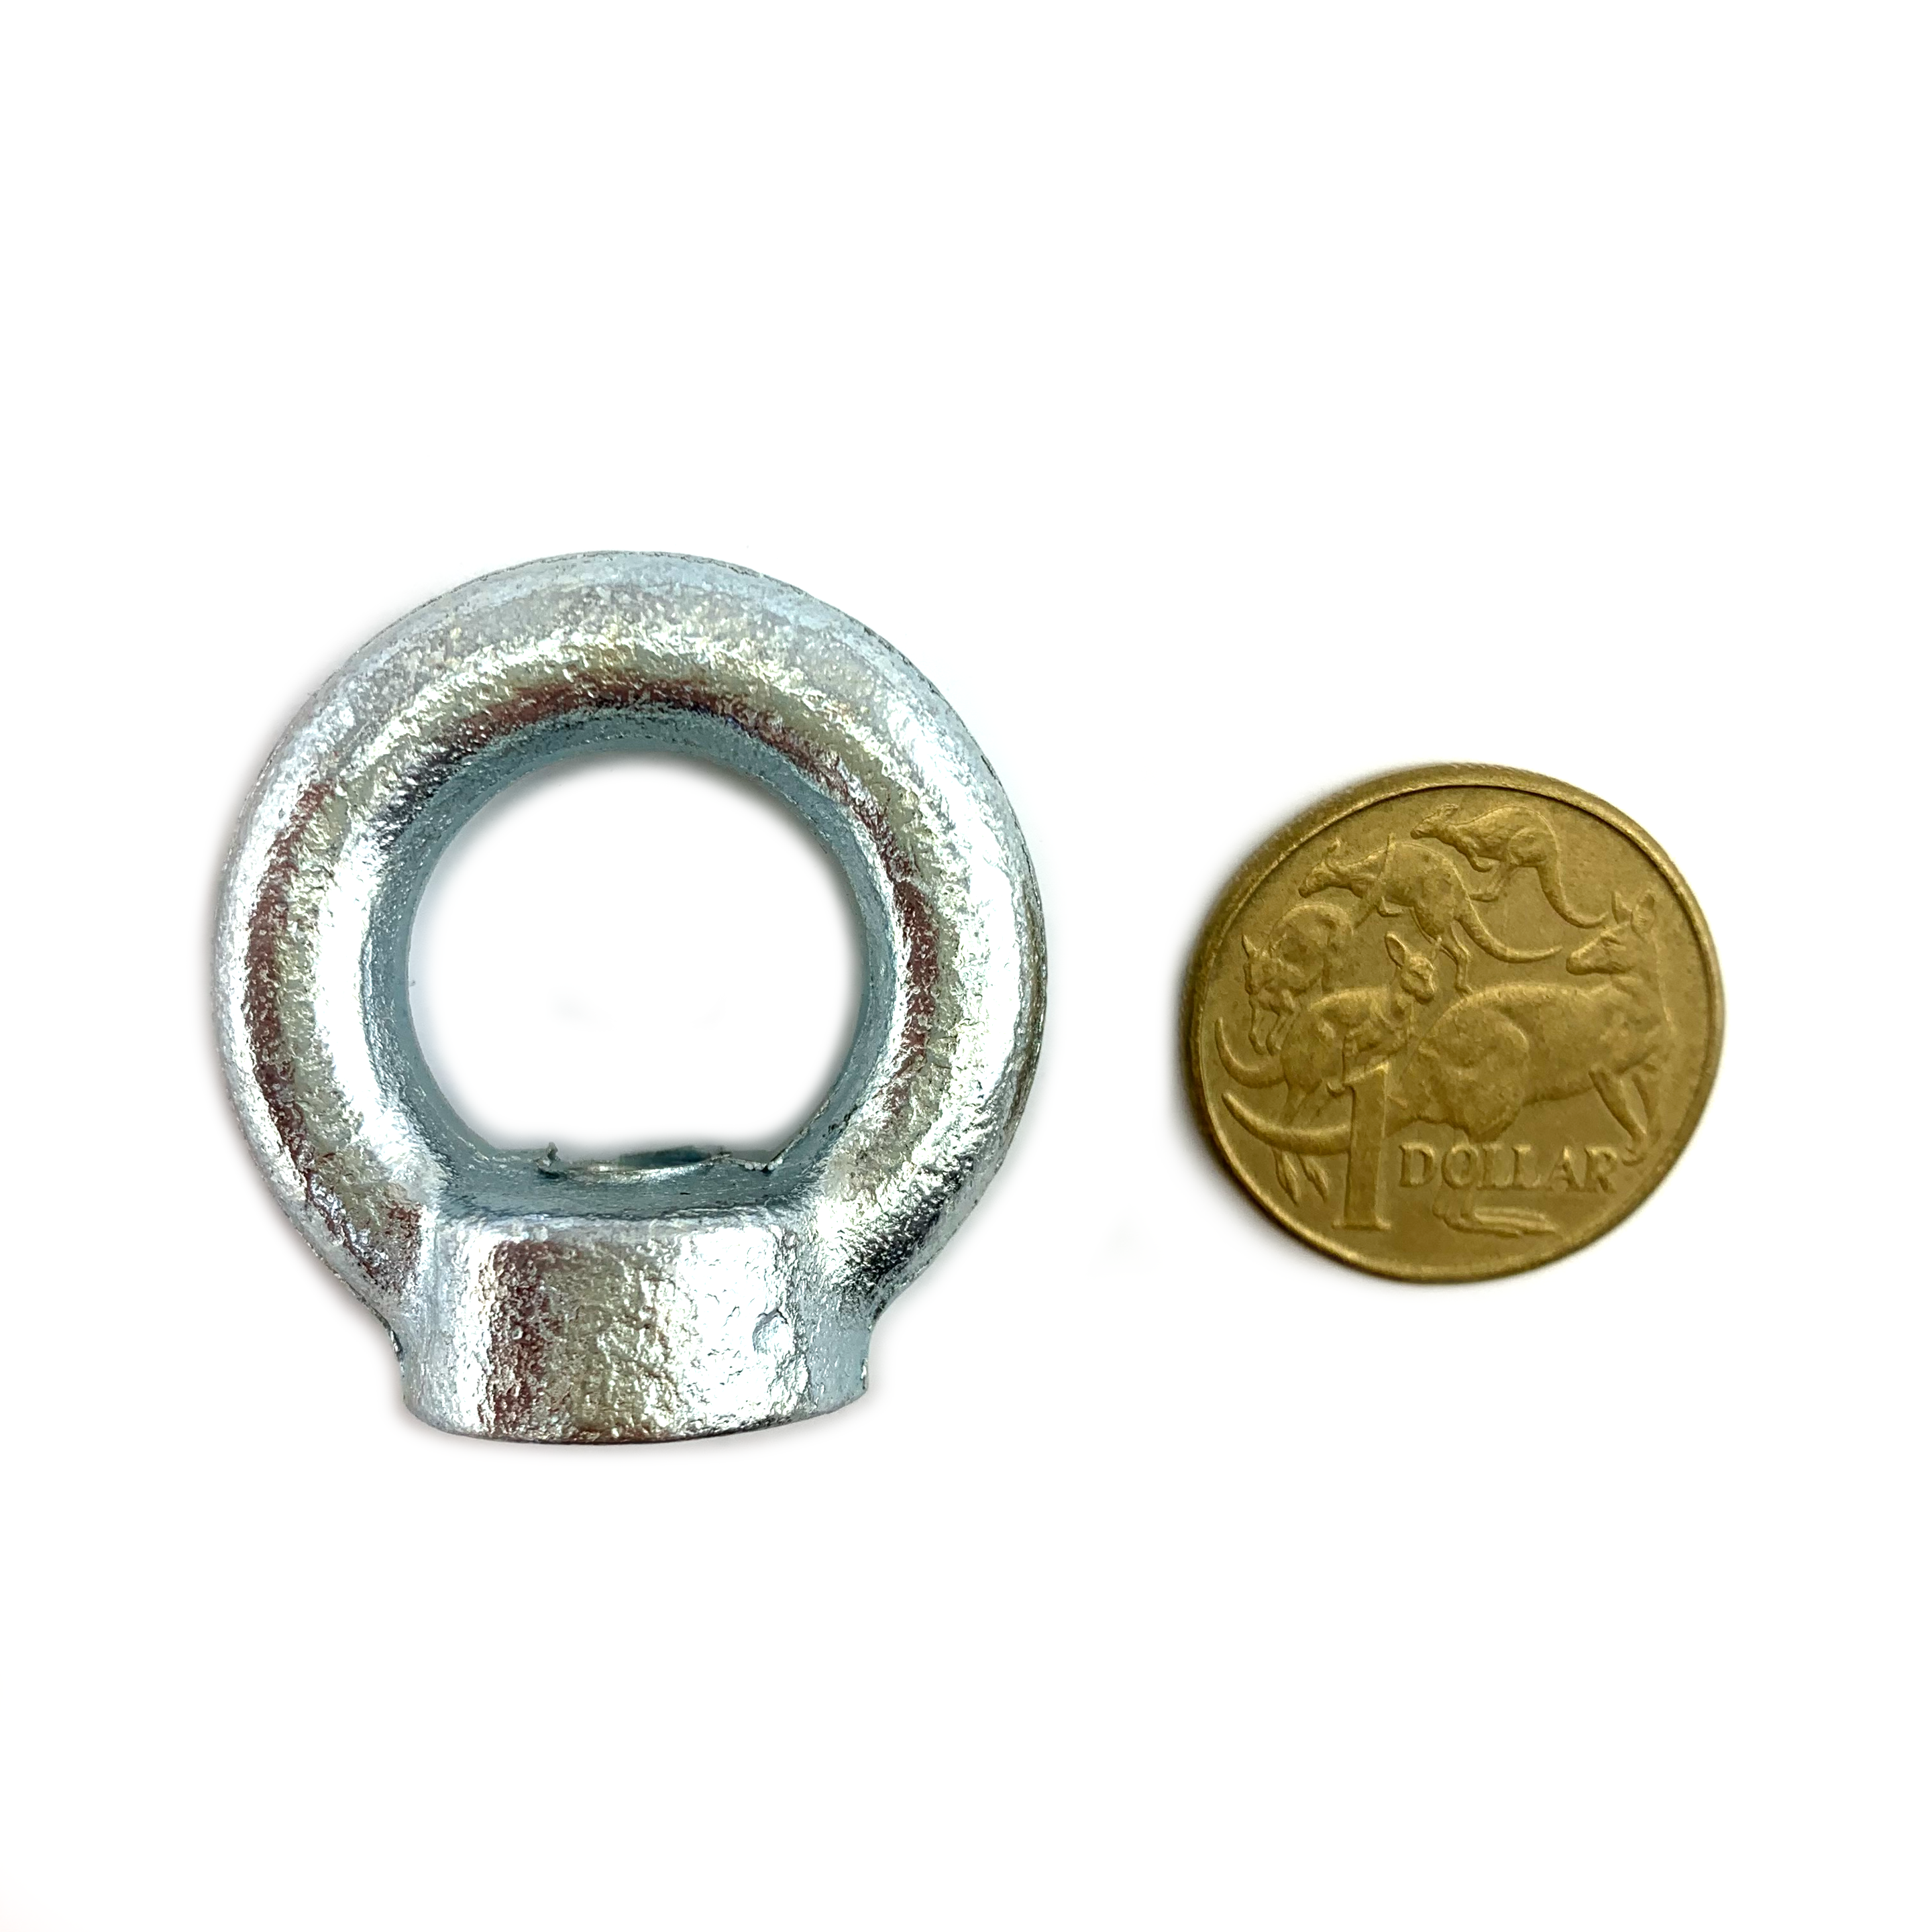 Galvanised lifting nut, size 8mm. Australia wide shipping. Shop hardware online chain.com.au.